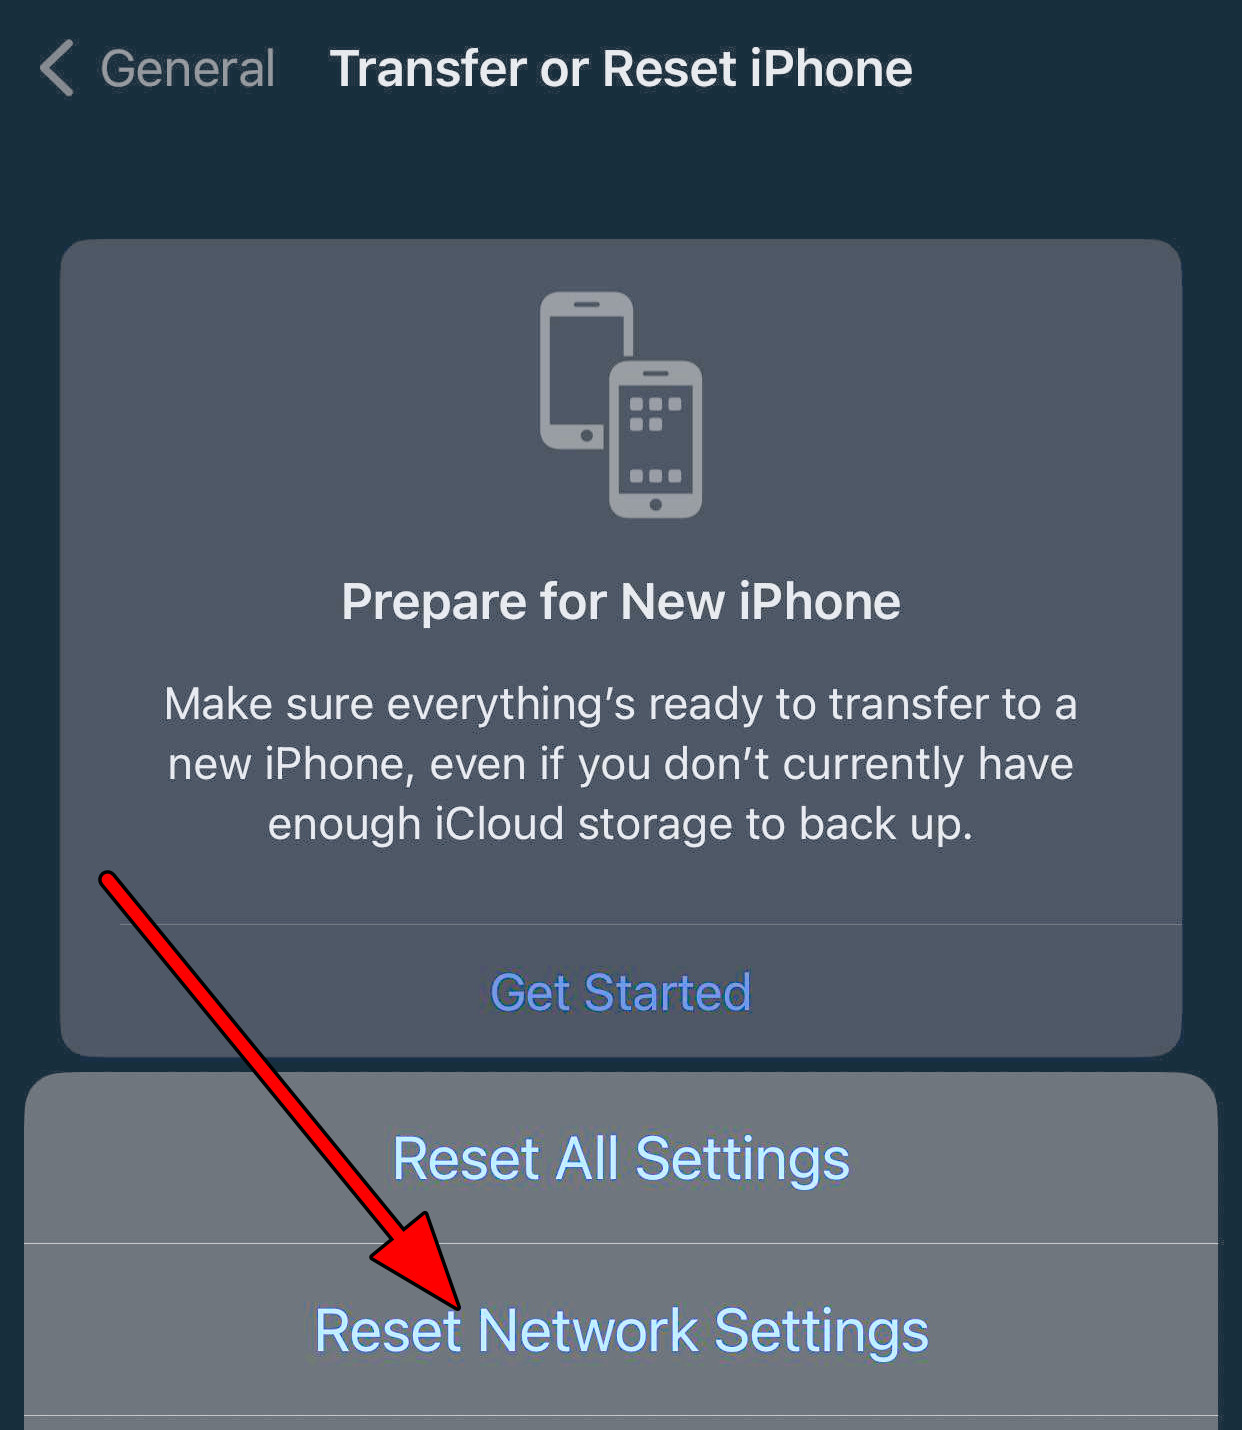 Reset the Network Settings of the iPhone